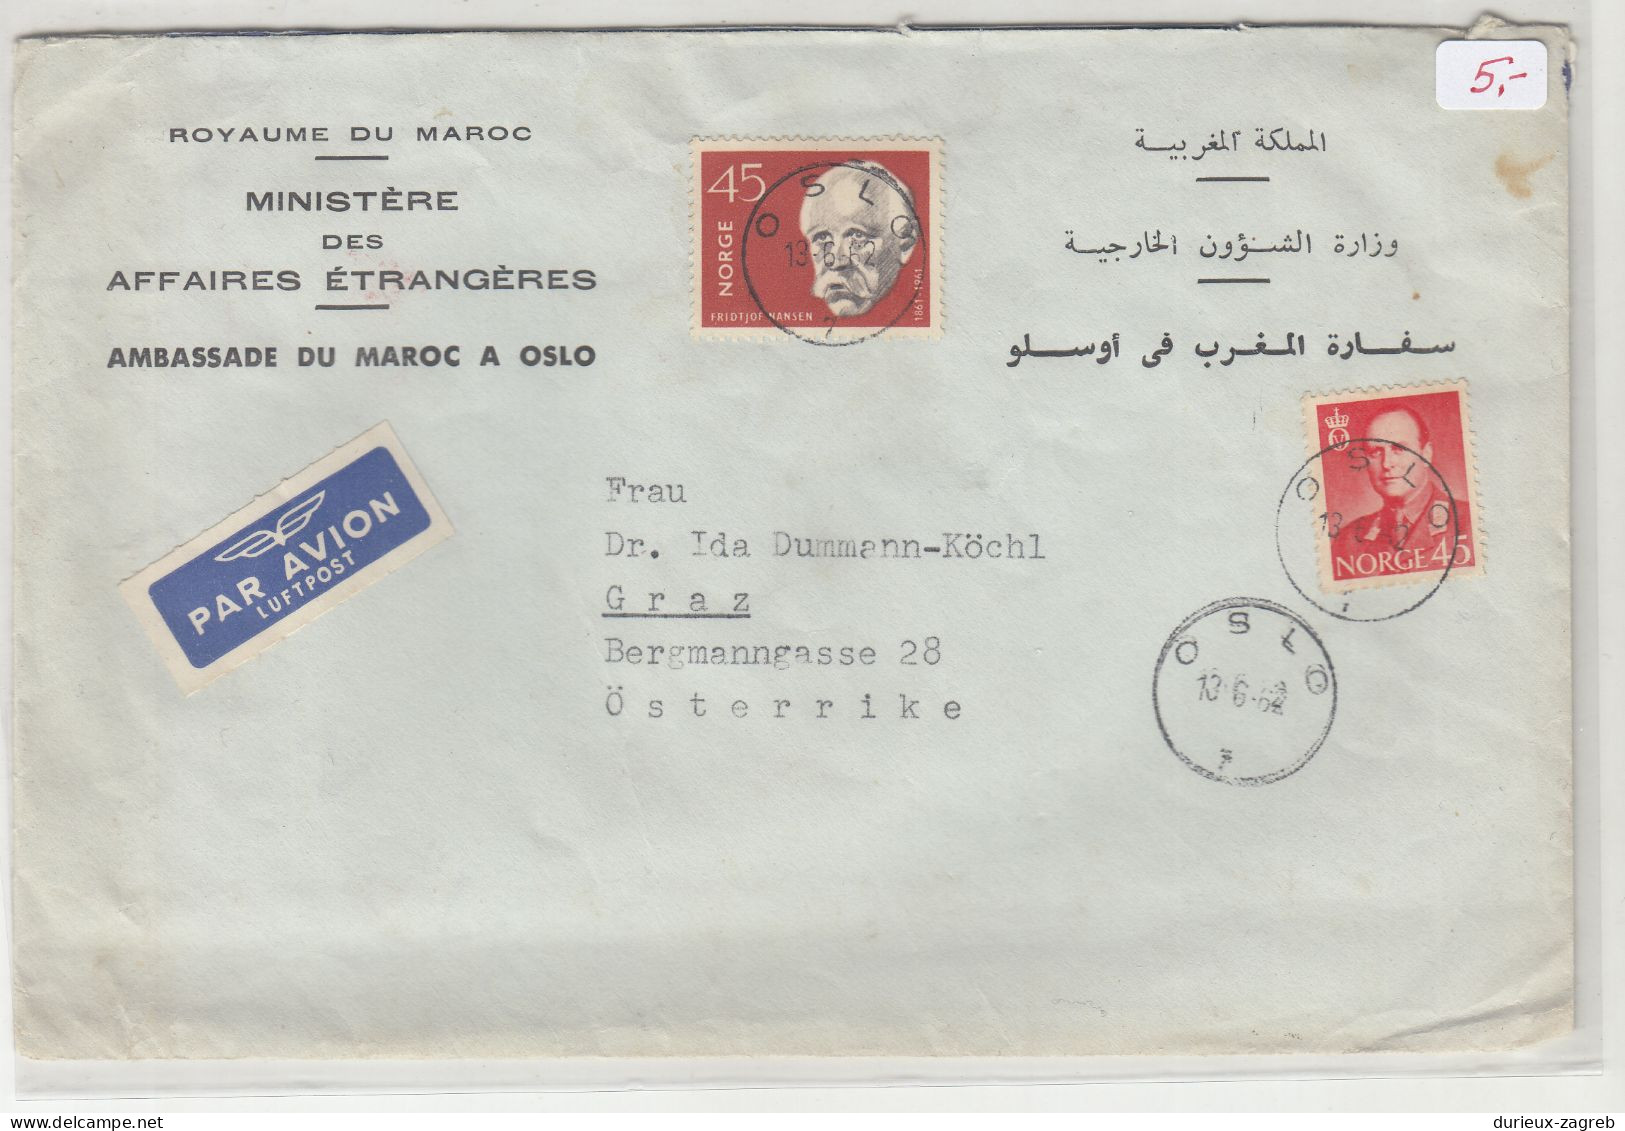 Ambassade Du Maroc A Oslo Official Letter Cover Posted 196? To Austria B230510 - Covers & Documents